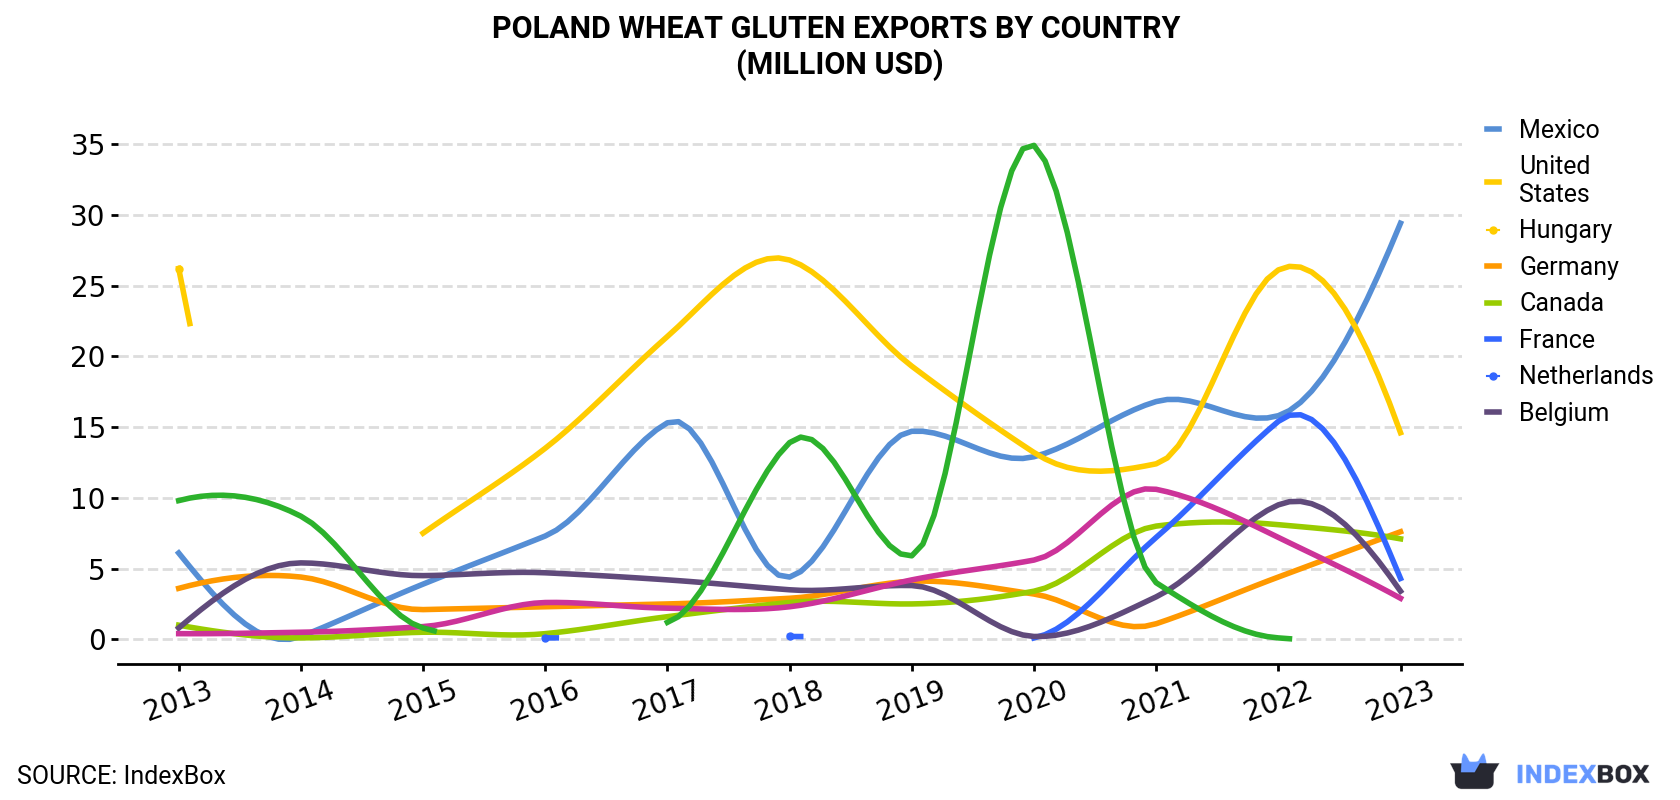 Poland Wheat Gluten Exports By Country (Million USD)